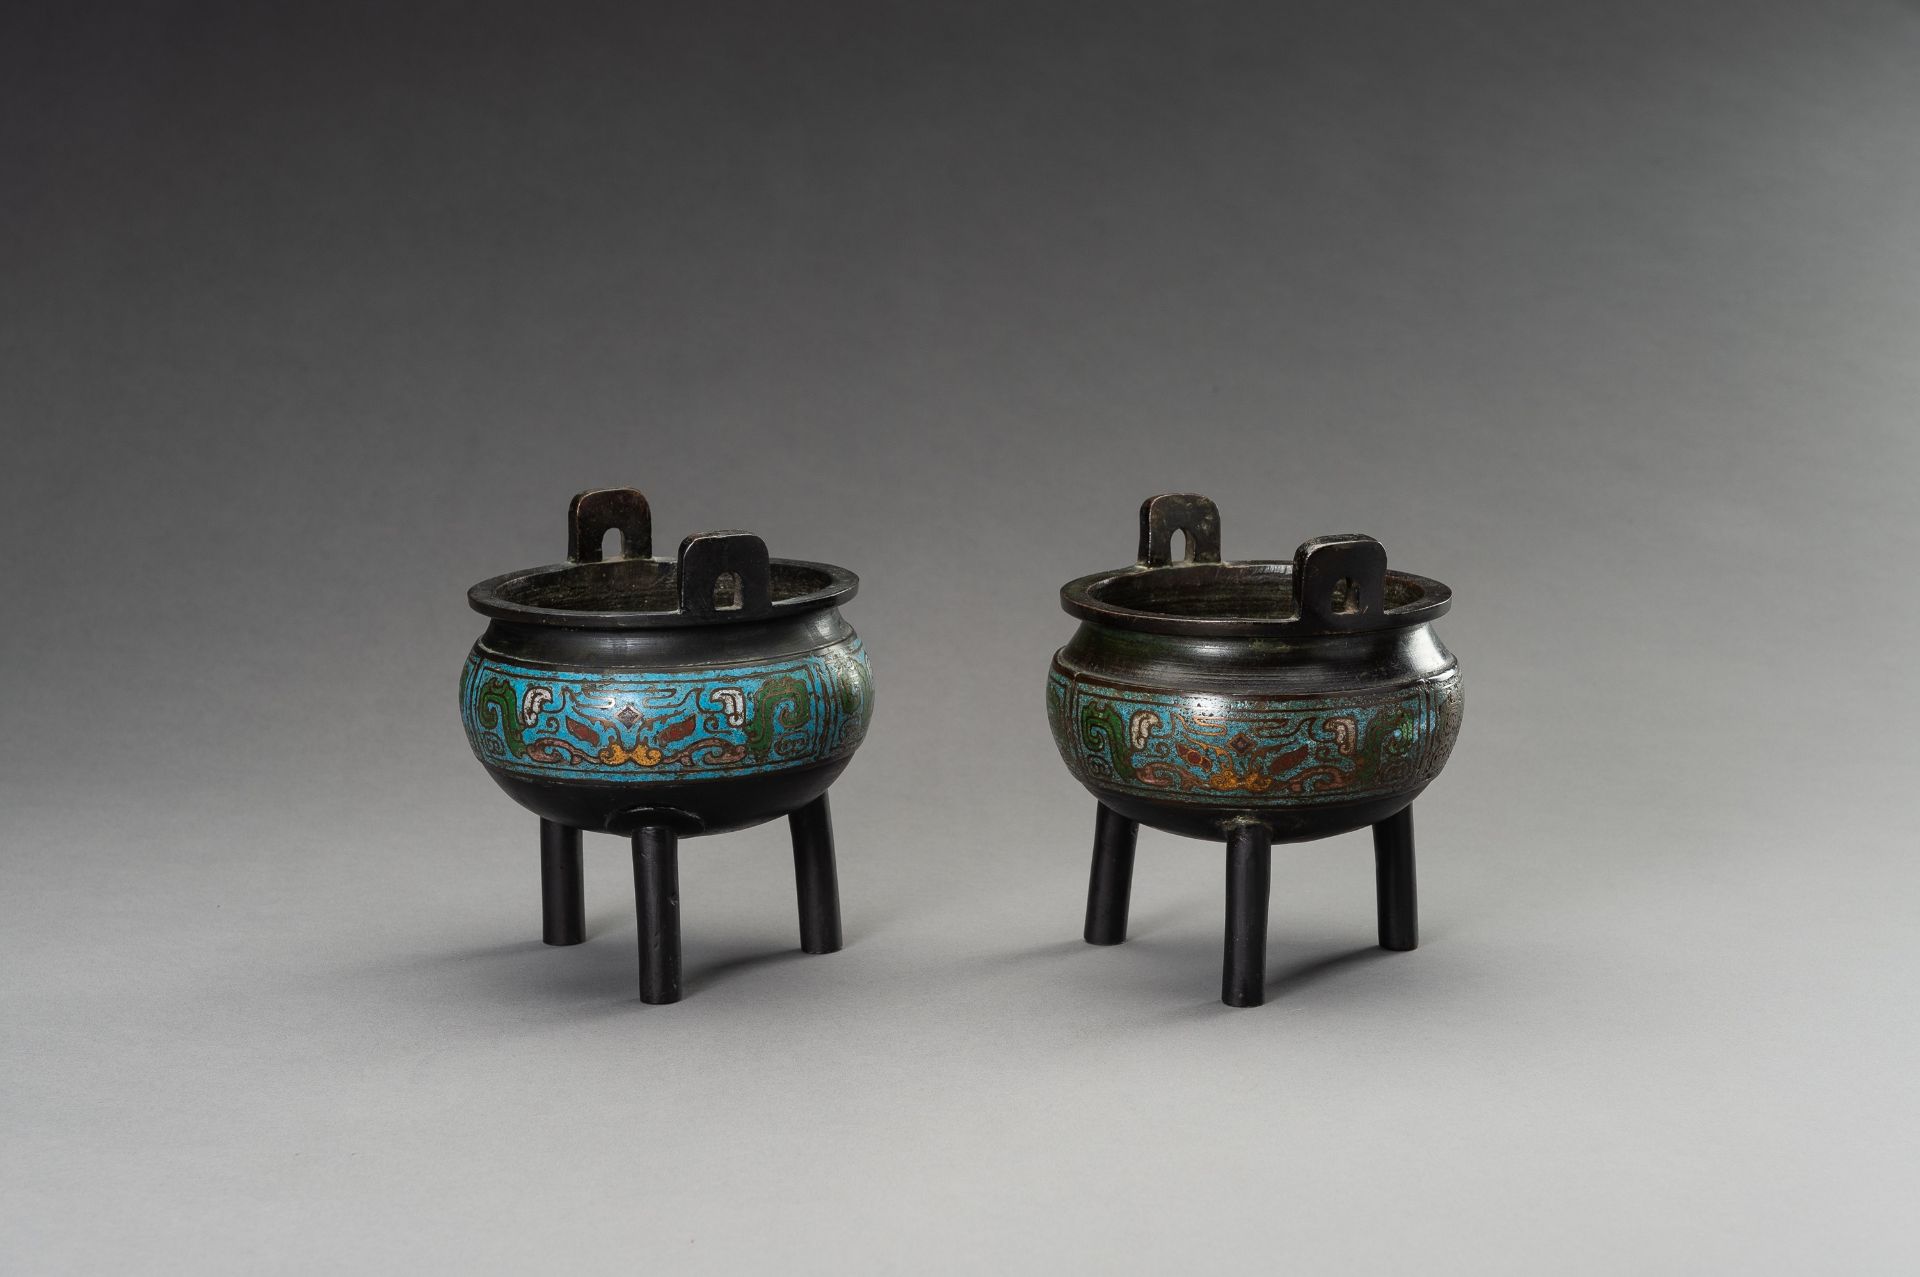 A PAIR OF CHAMPLEVE ENAMEL BRONZE TRIPOD CENSERS, QING DYNASTY - Image 5 of 9